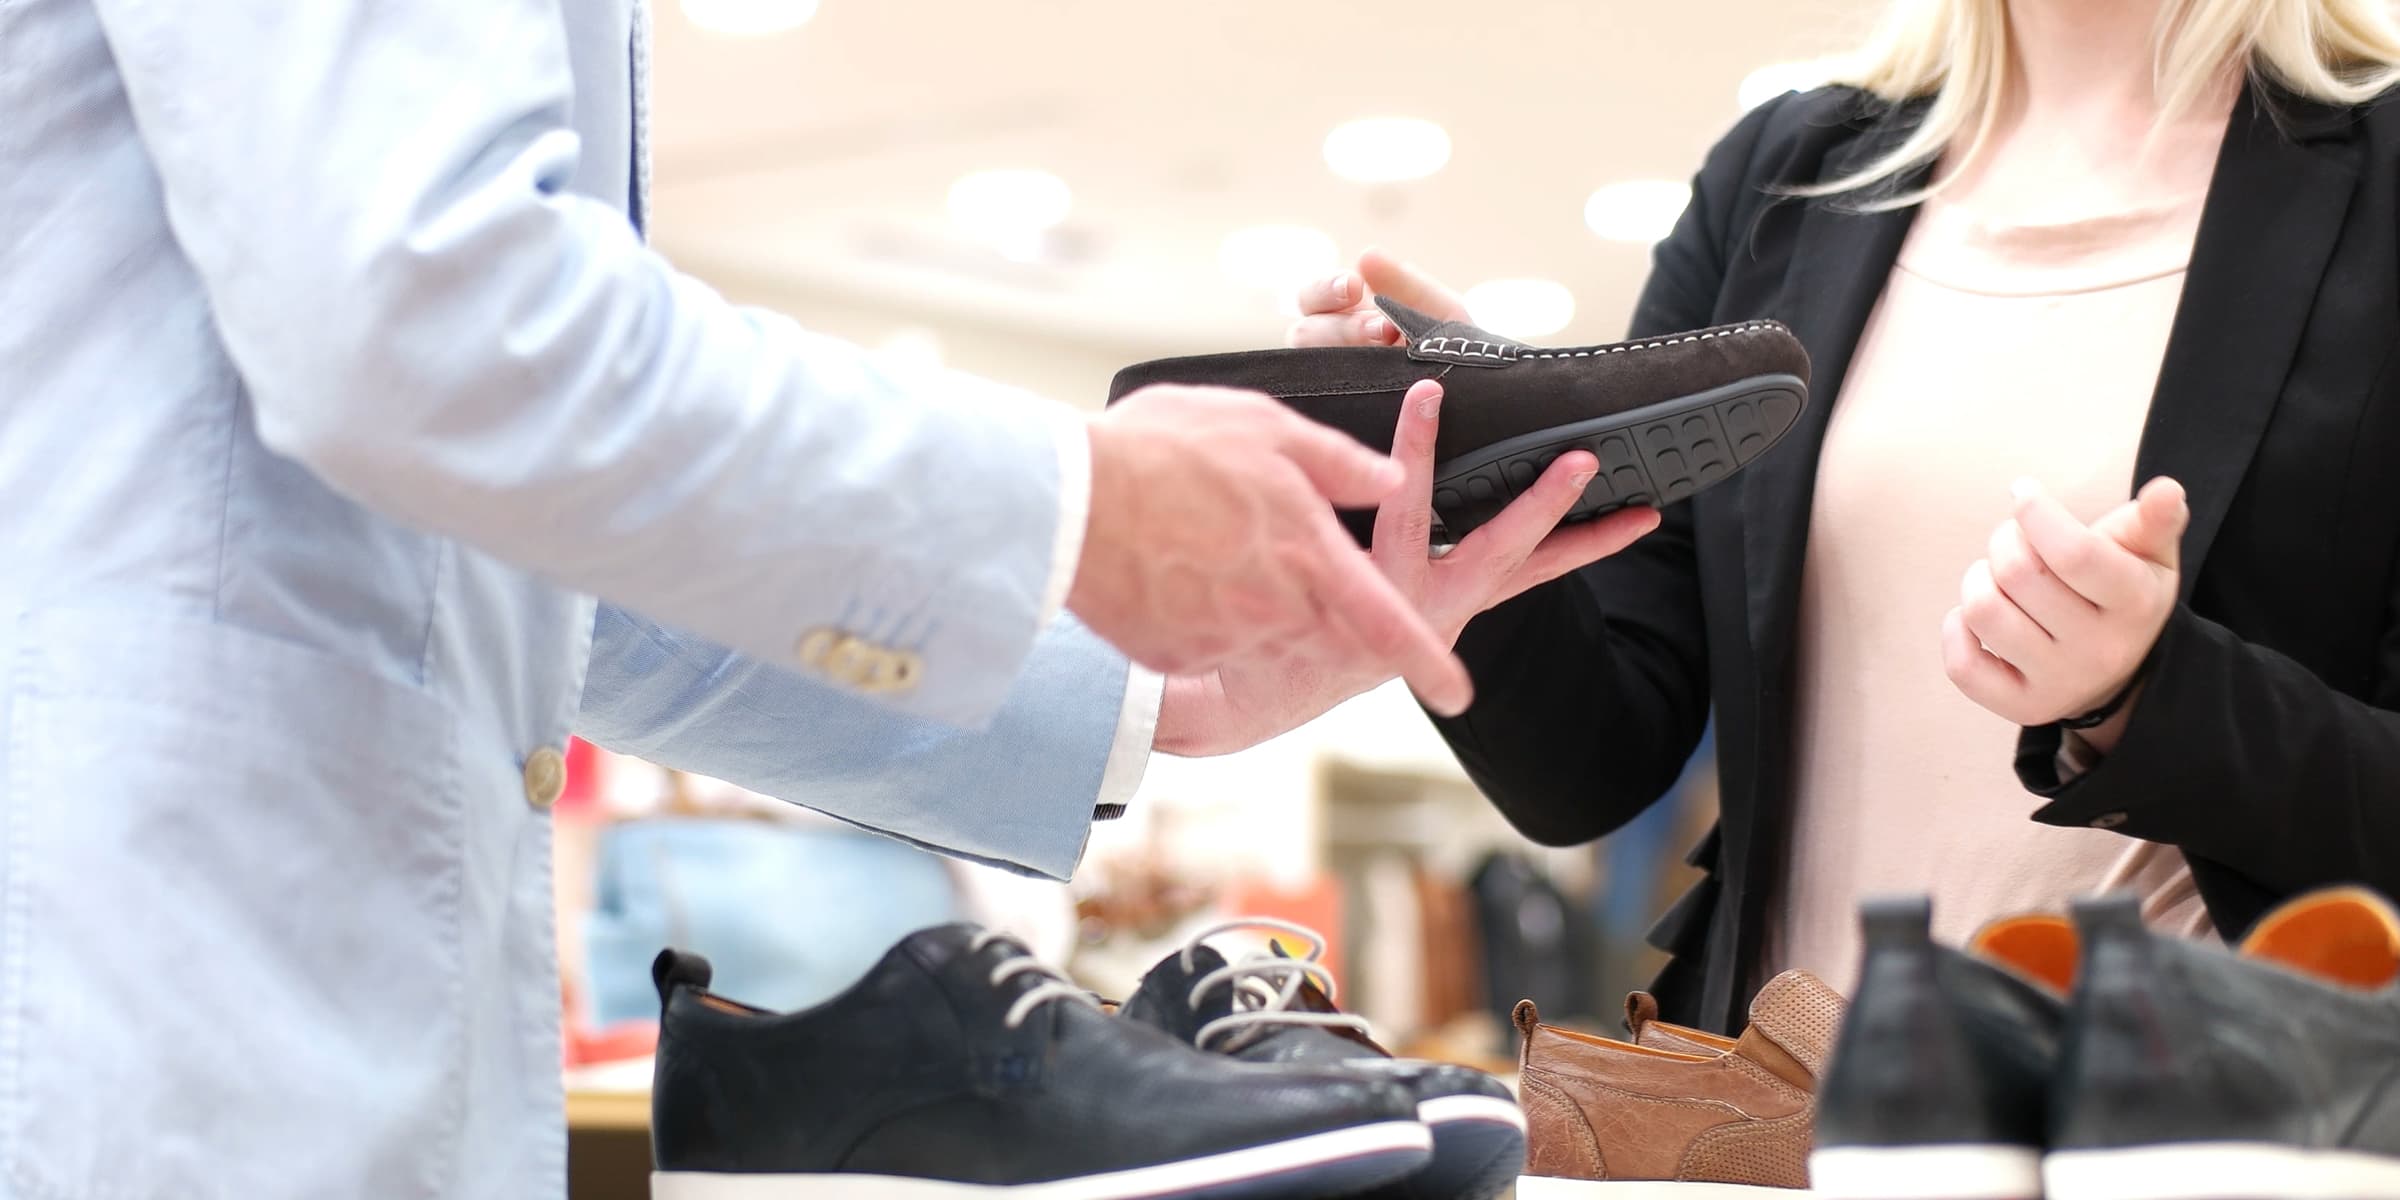 Retail person holding shoe